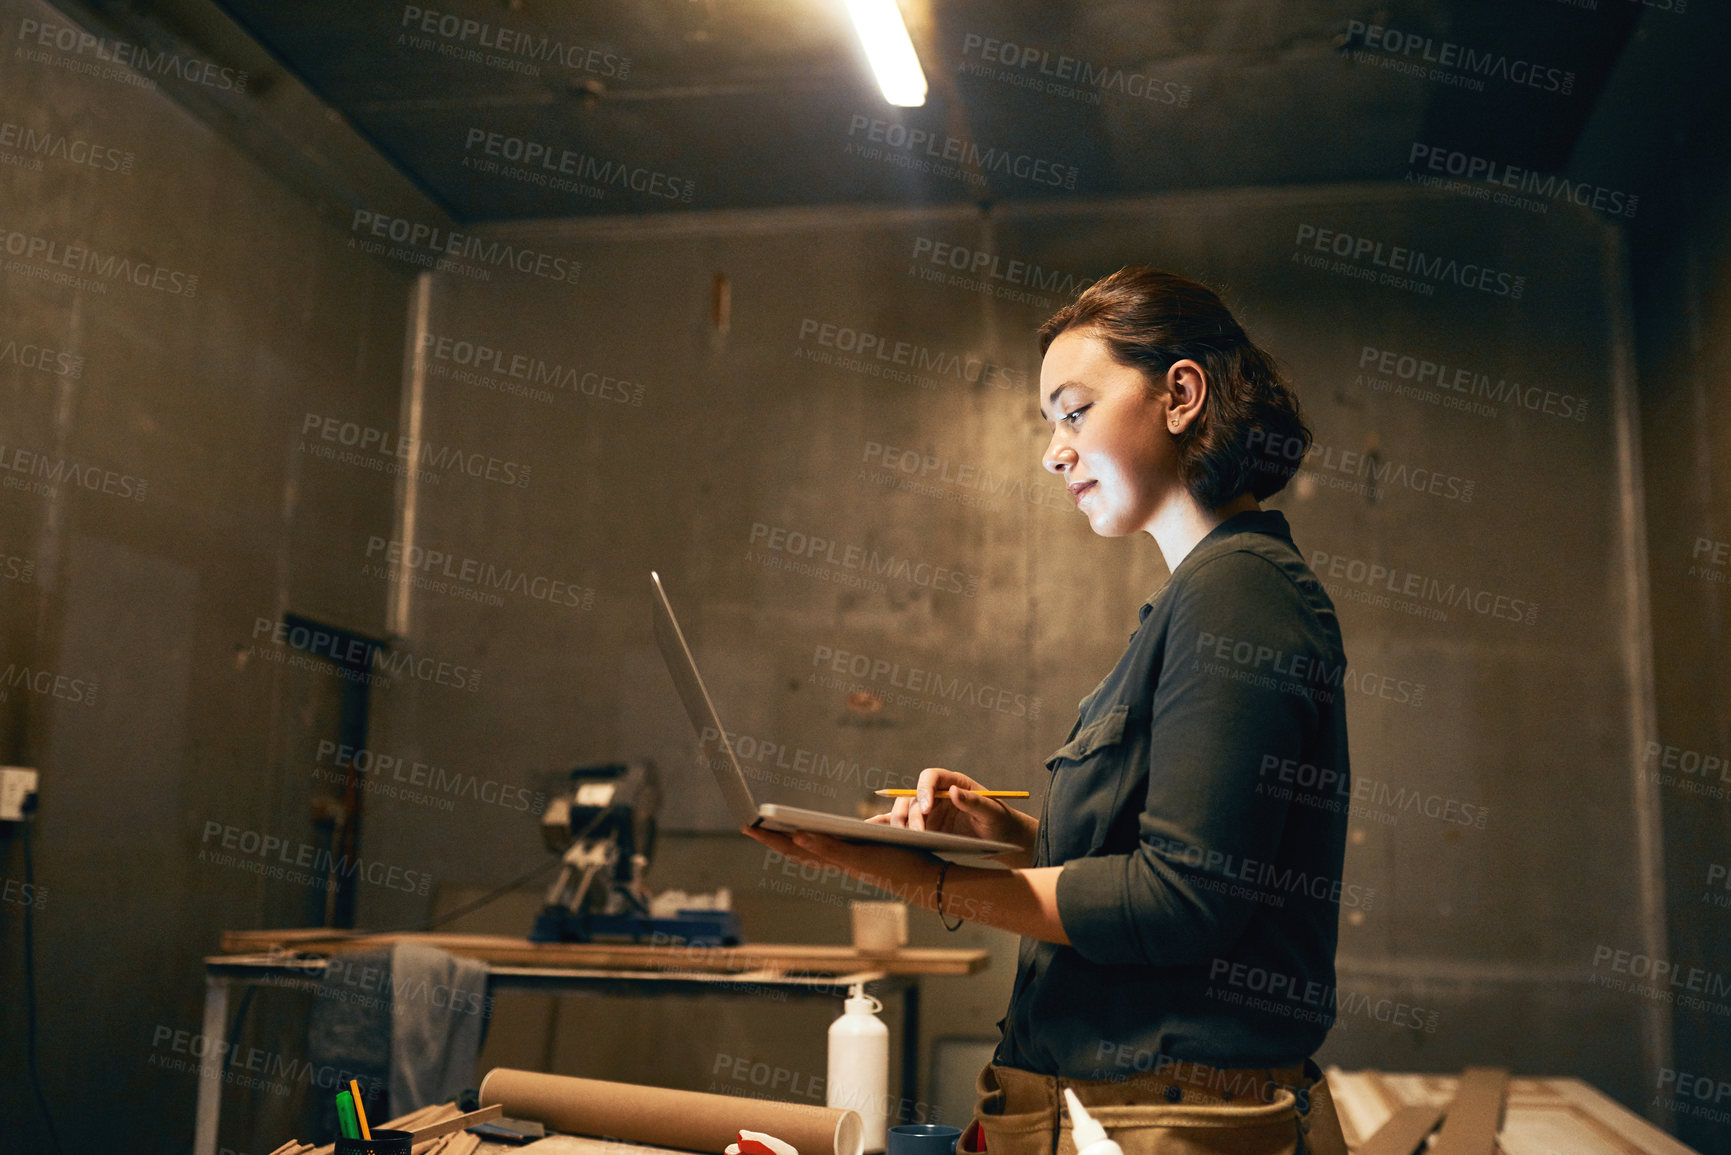 Buy stock photo Cropped shot of an attractive young female carpenter working on her laptop in the workshop